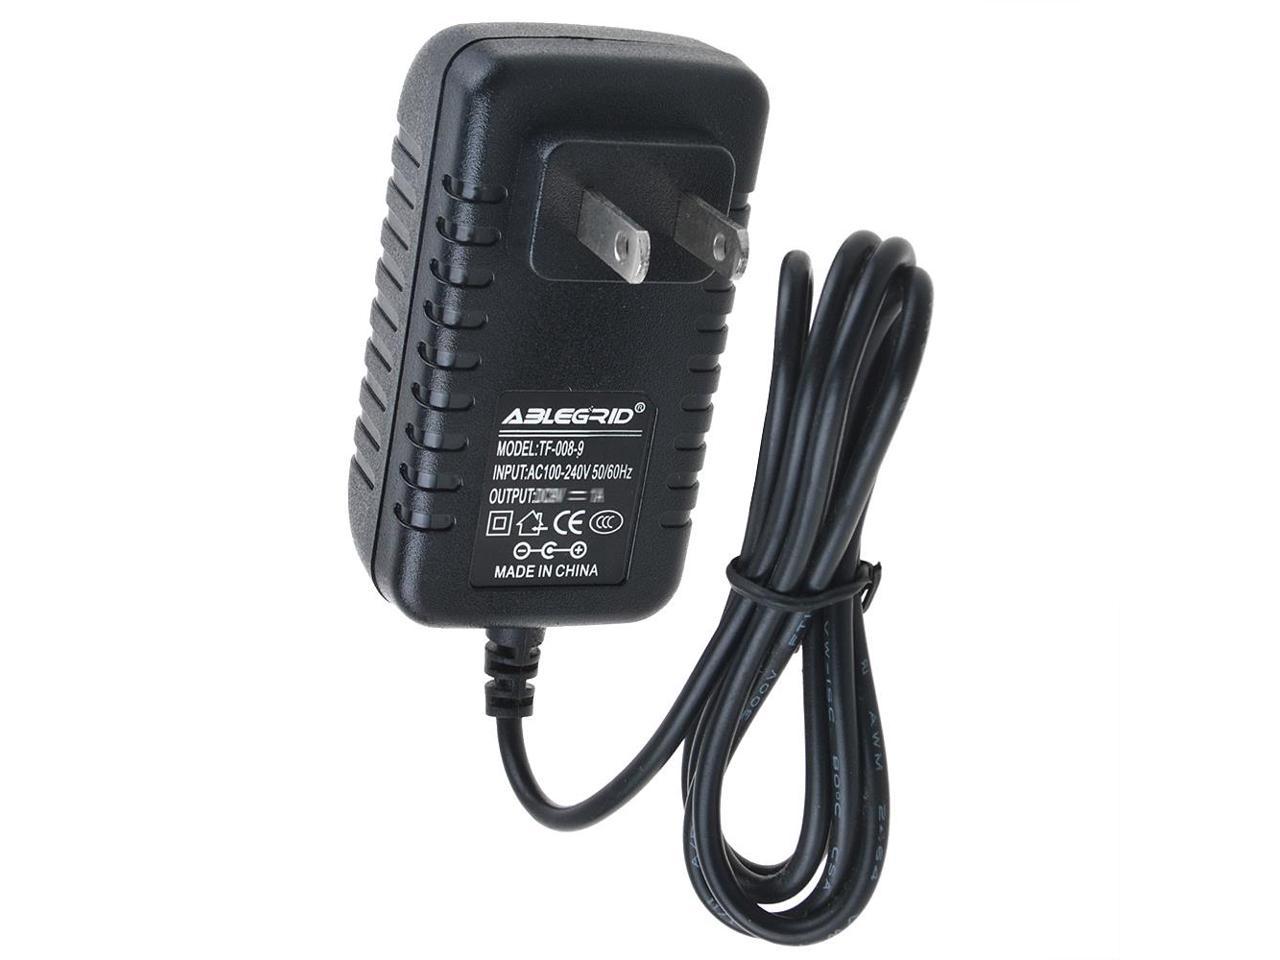 AC Adapter For DVE DSA-9W-09 FUS 090100 Switching Power Supply Wall Charger PSU 